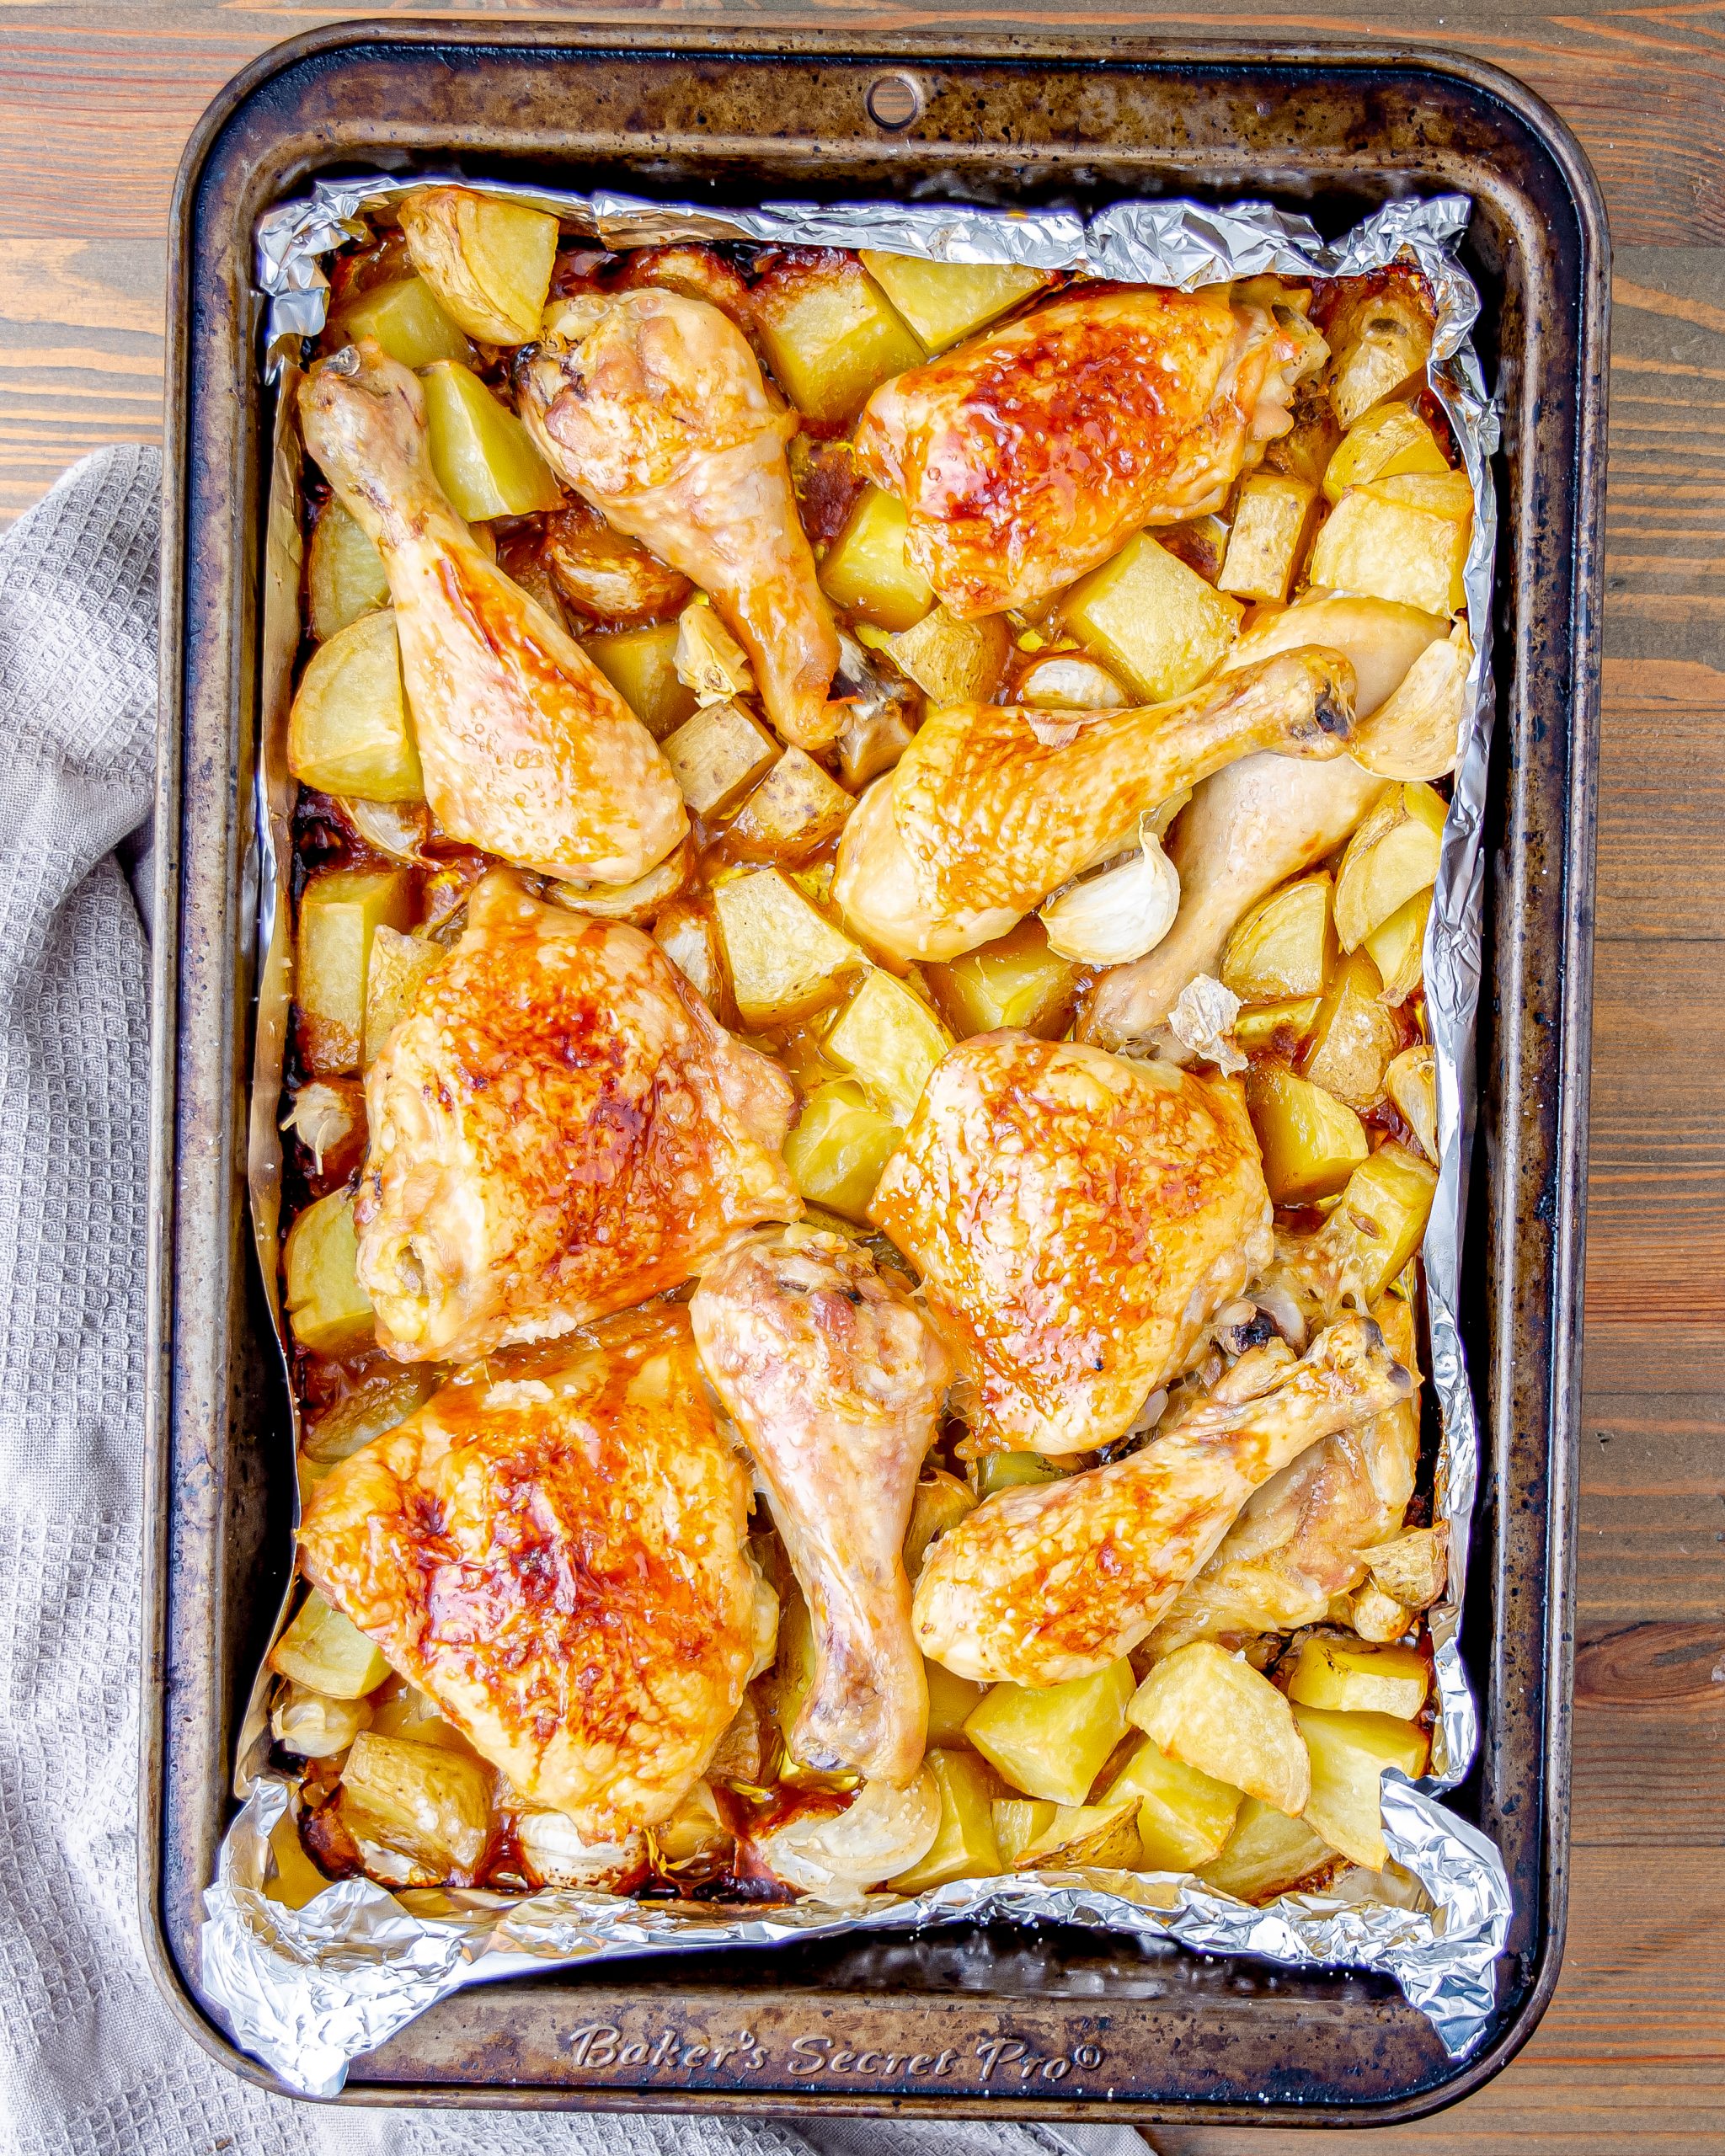 Remove the dish from the oven, and brush the chicken with maple syrup.